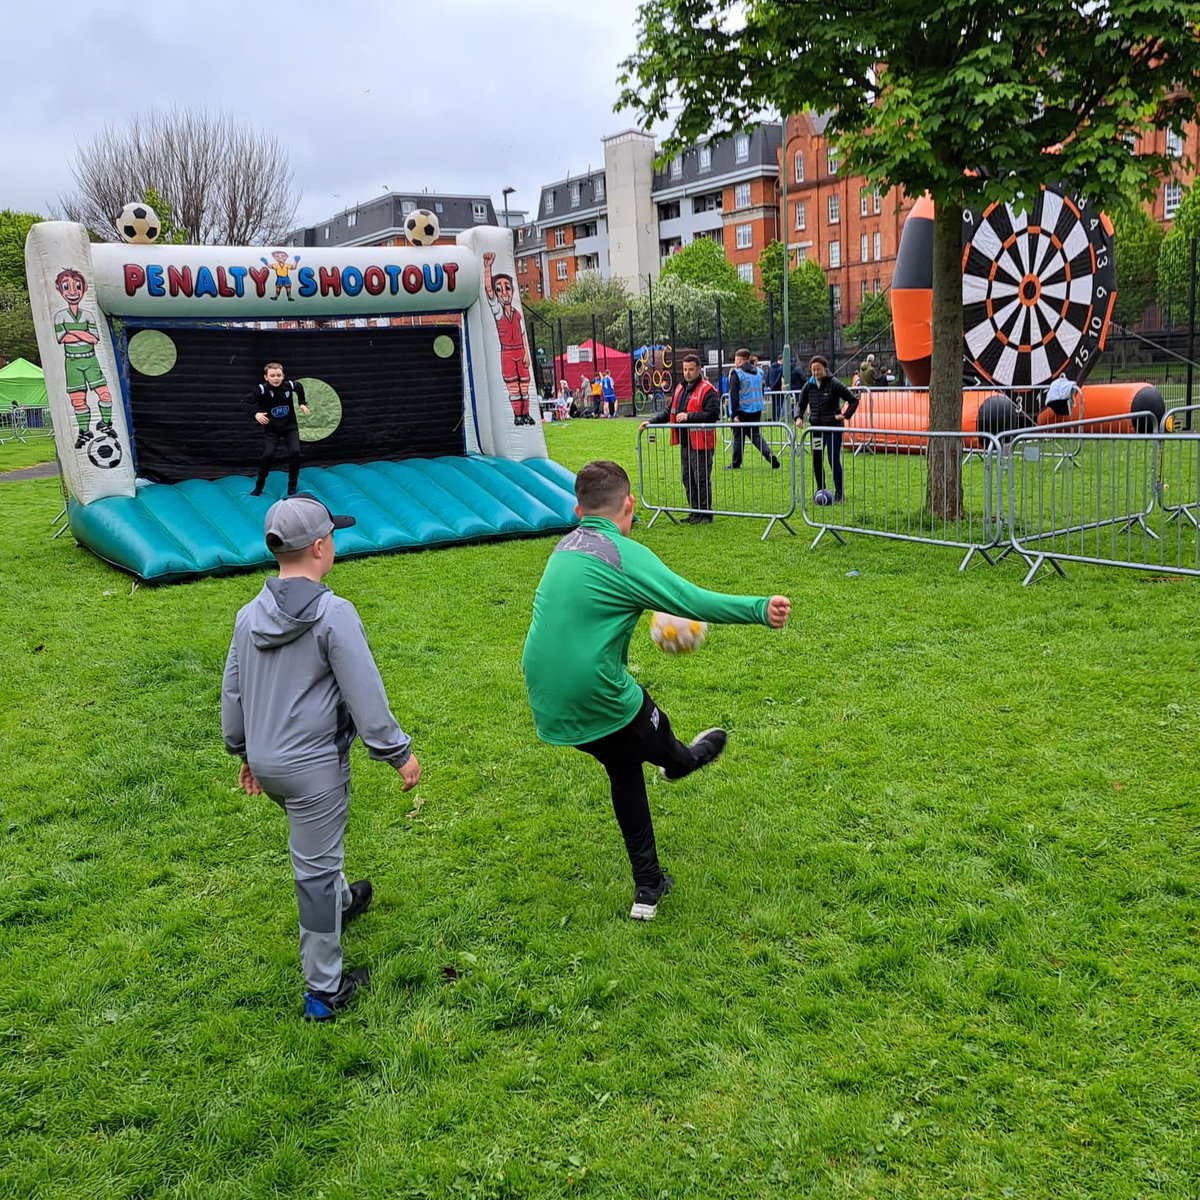 Over the bank holiday weekend, residents of our Kevin Street estate enjoyed a youth soccer event and a fun day at the Cabbage Patch Park. The event was kindly organised by @DubCityCouncil, Celtic Iveagh, Kevin St Gardai and the Trust. ⚽️🤸 #TheIveaghTrust #WeBuildCommunities